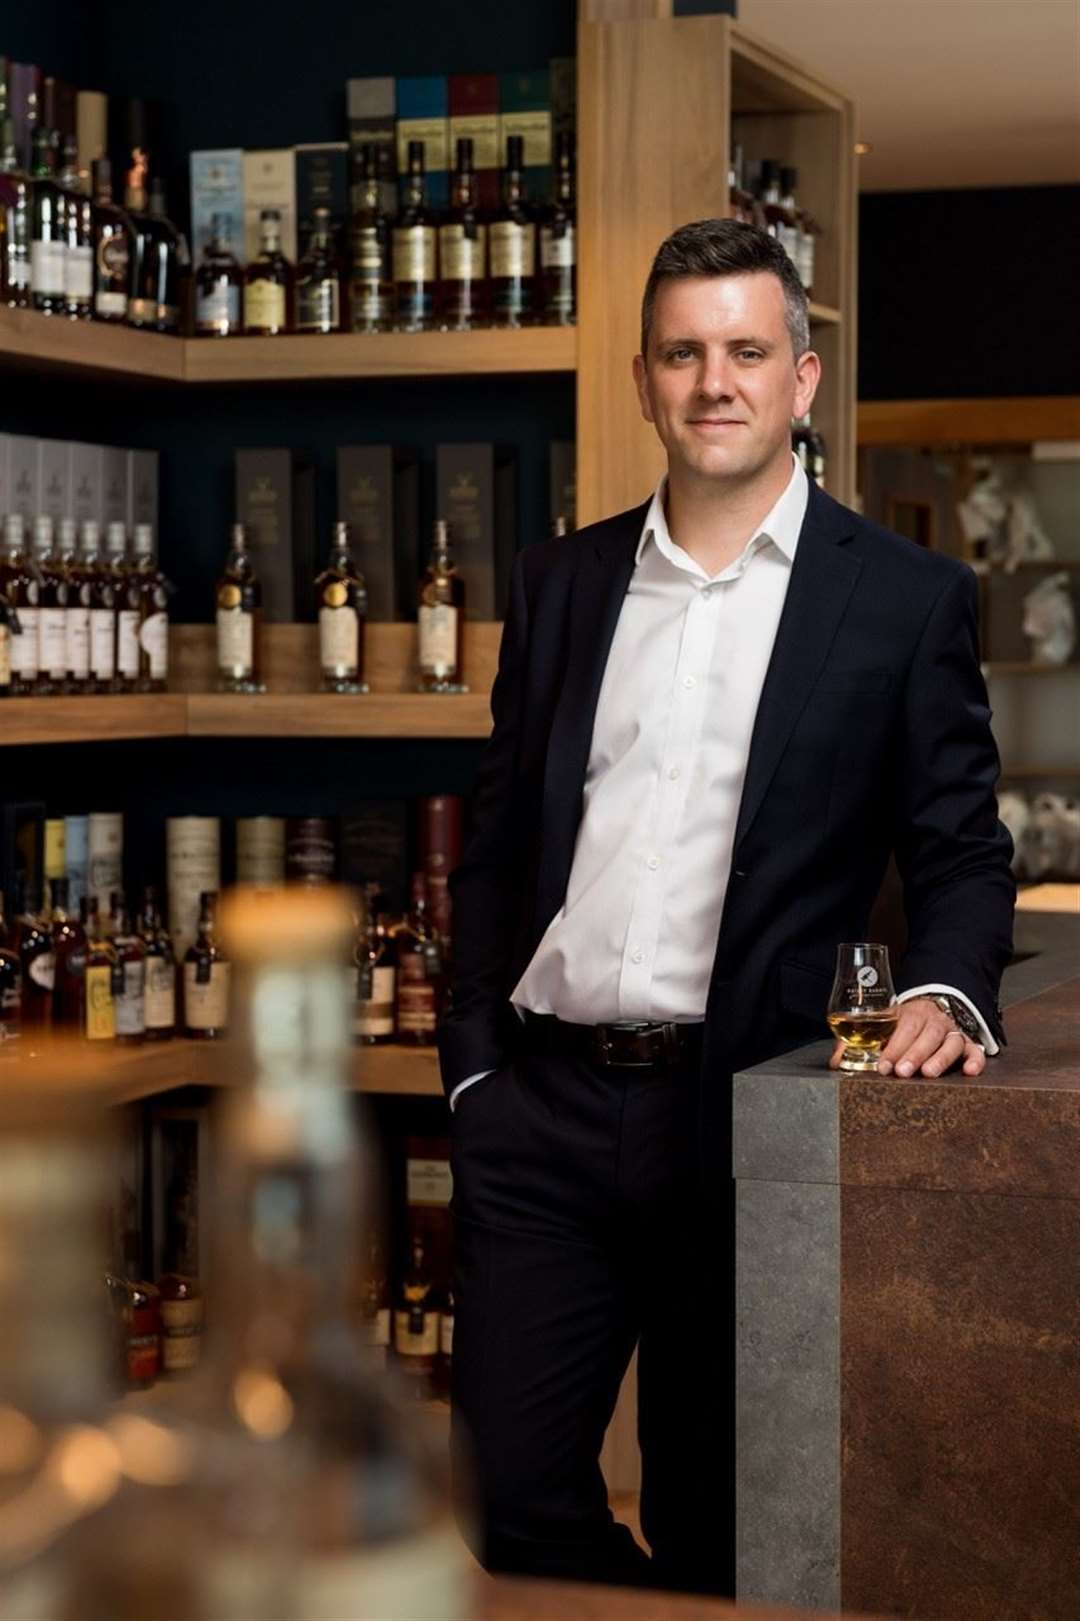 Daniel Milne, co-founder and managing director of Whisky Hammer.